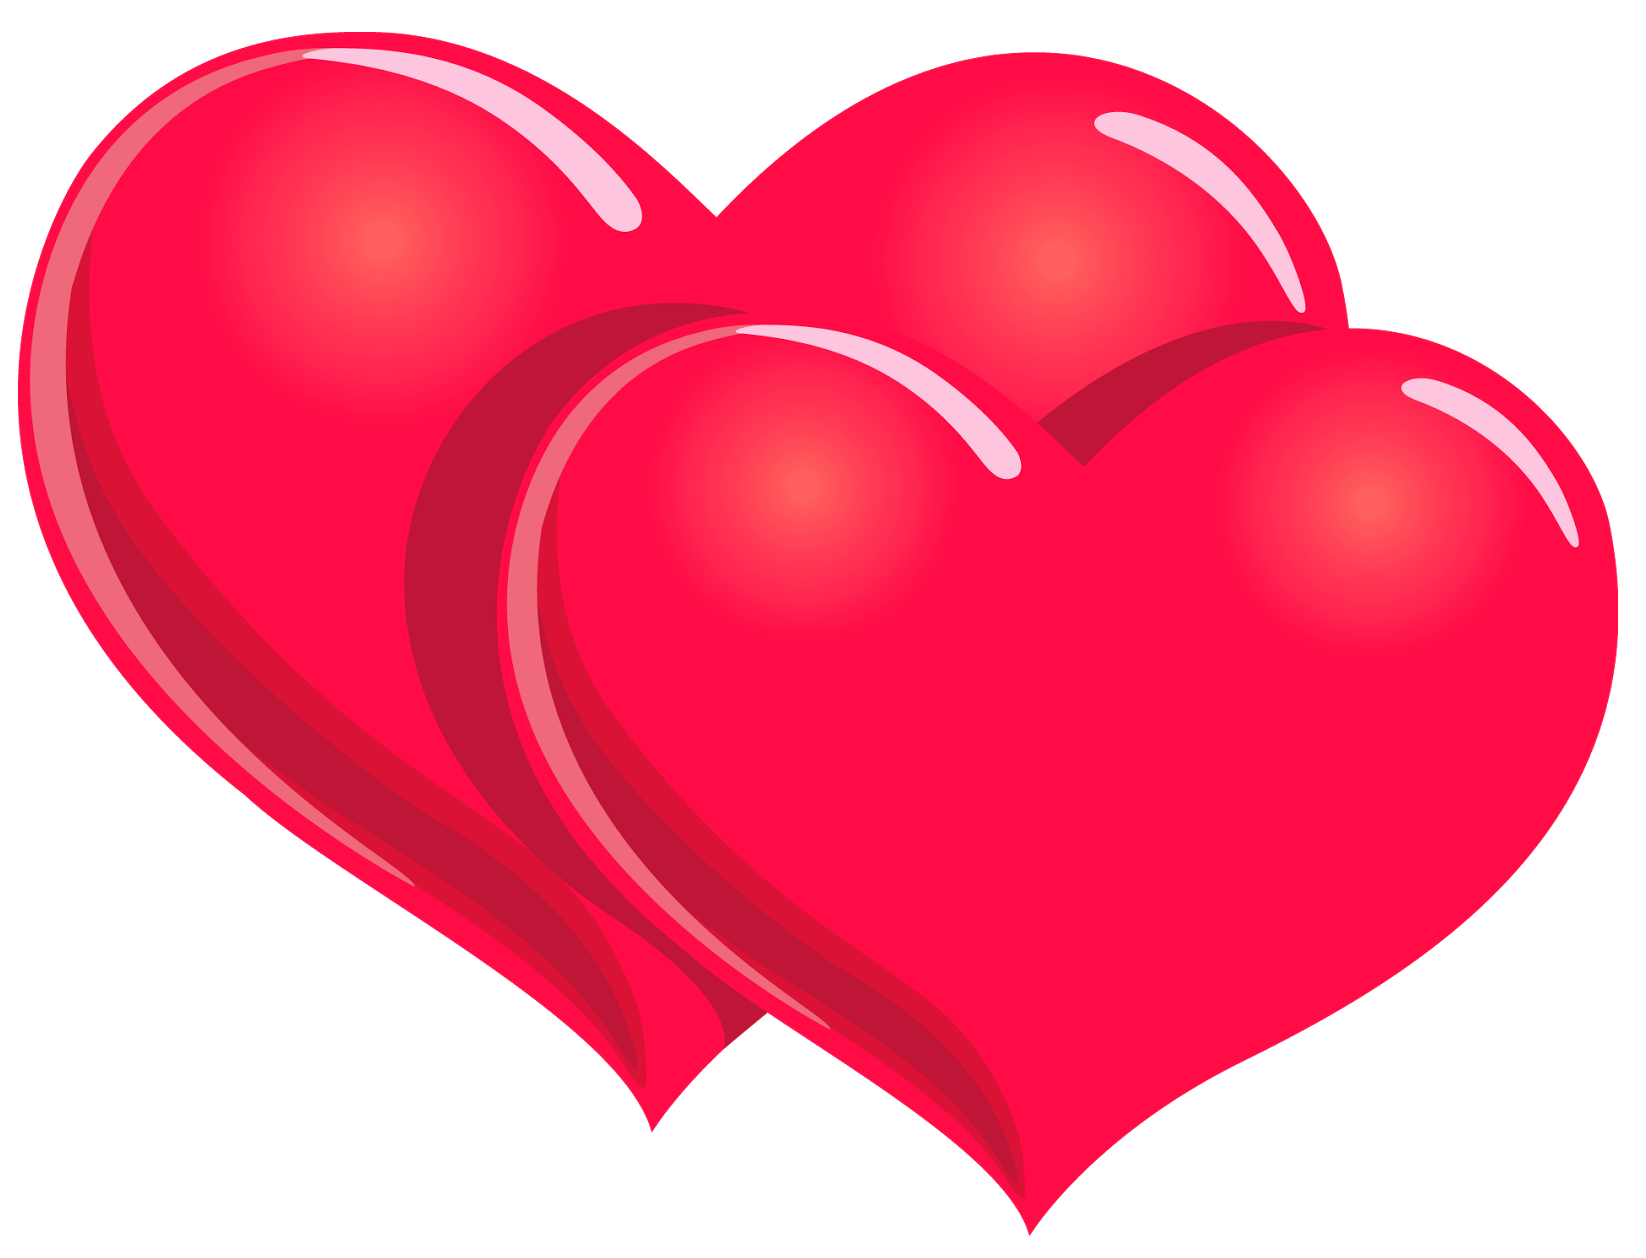 Valentines Day Heart PNG Images